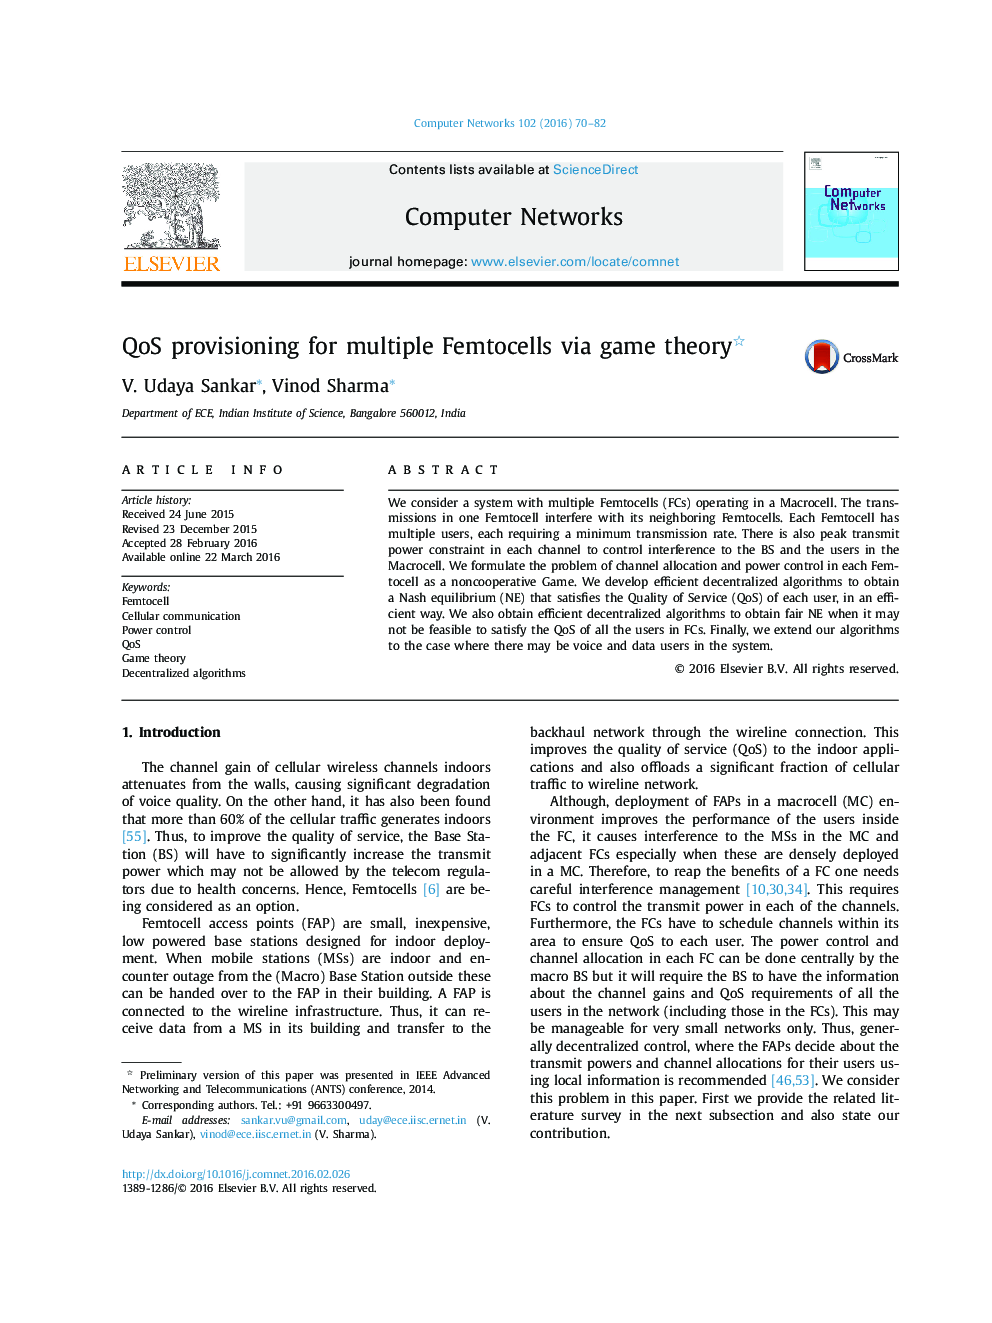 QoS provisioning for multiple Femtocells via game theory 